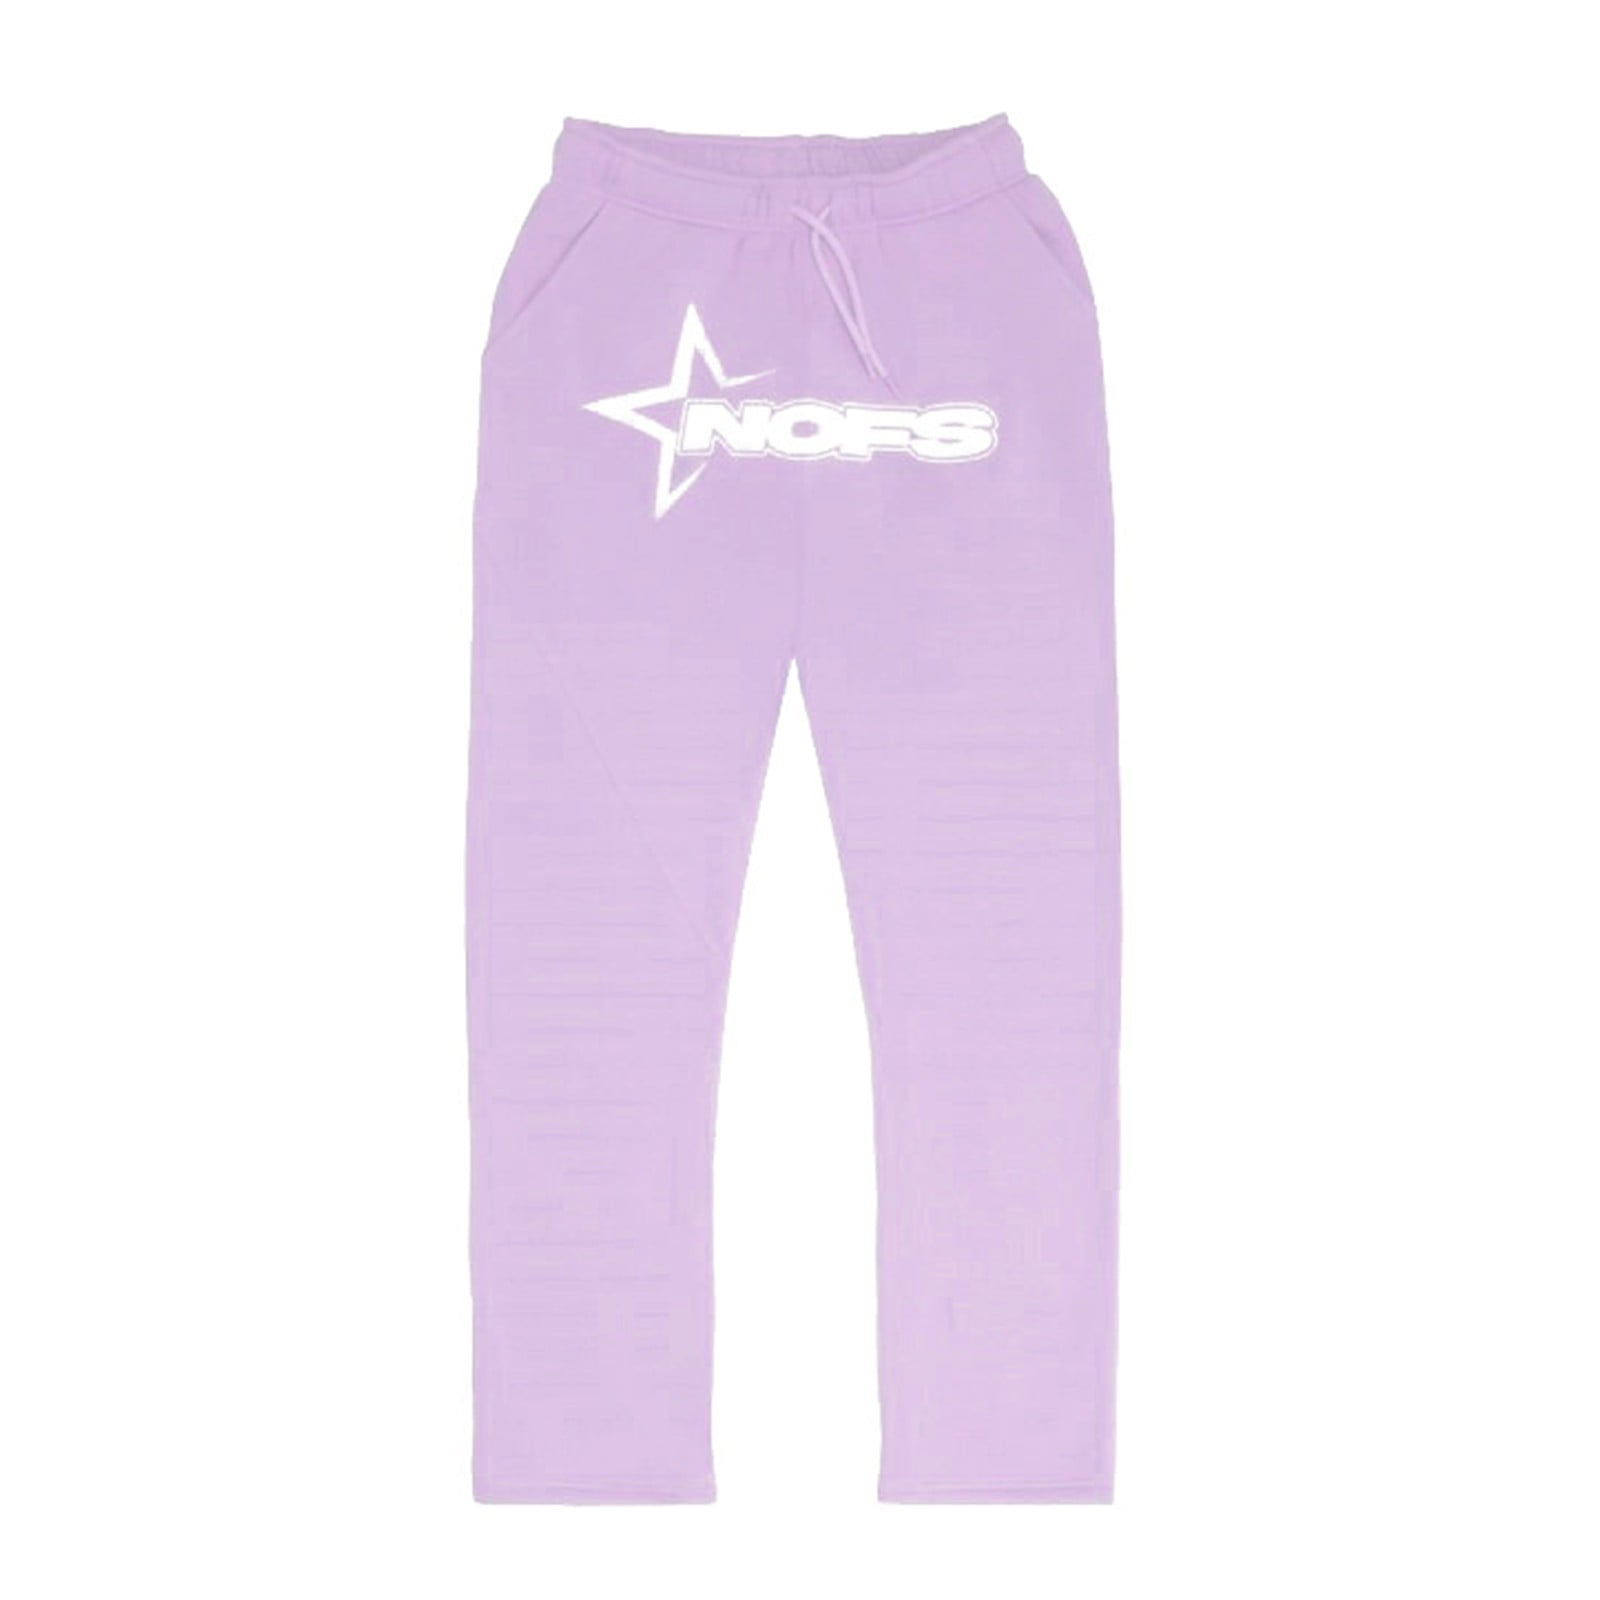 Don't Miss Out! Gomind NOFS Women's Pajama Pants Street Hip-hop ...